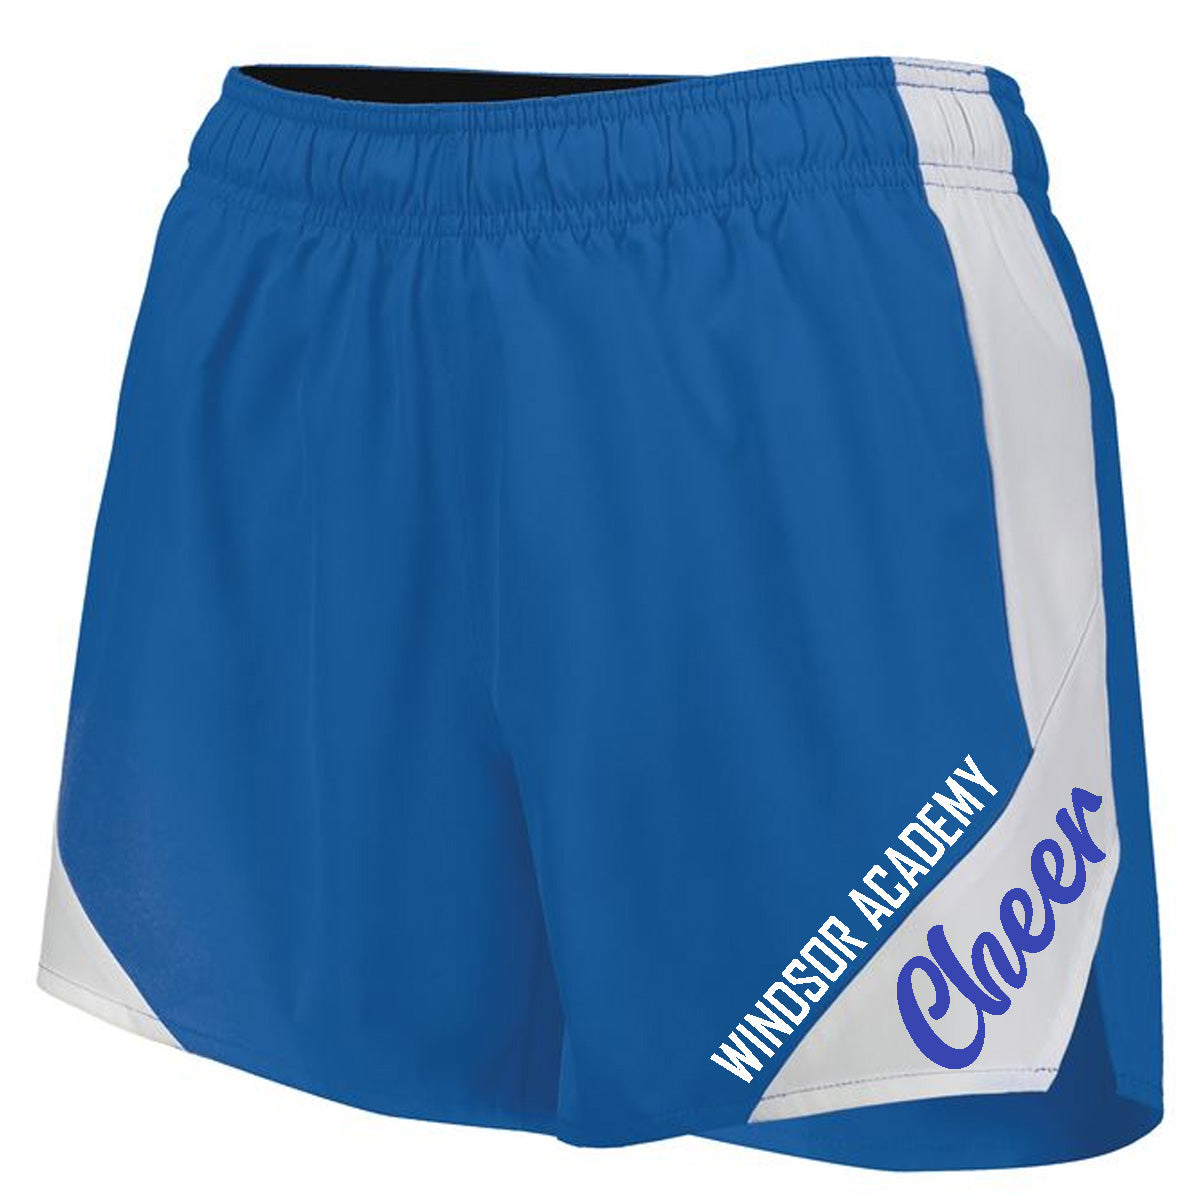 Windsor - Windsor Academy Cheer - Royal Olympus Shorts (229389/229489) - Southern Grace Creations